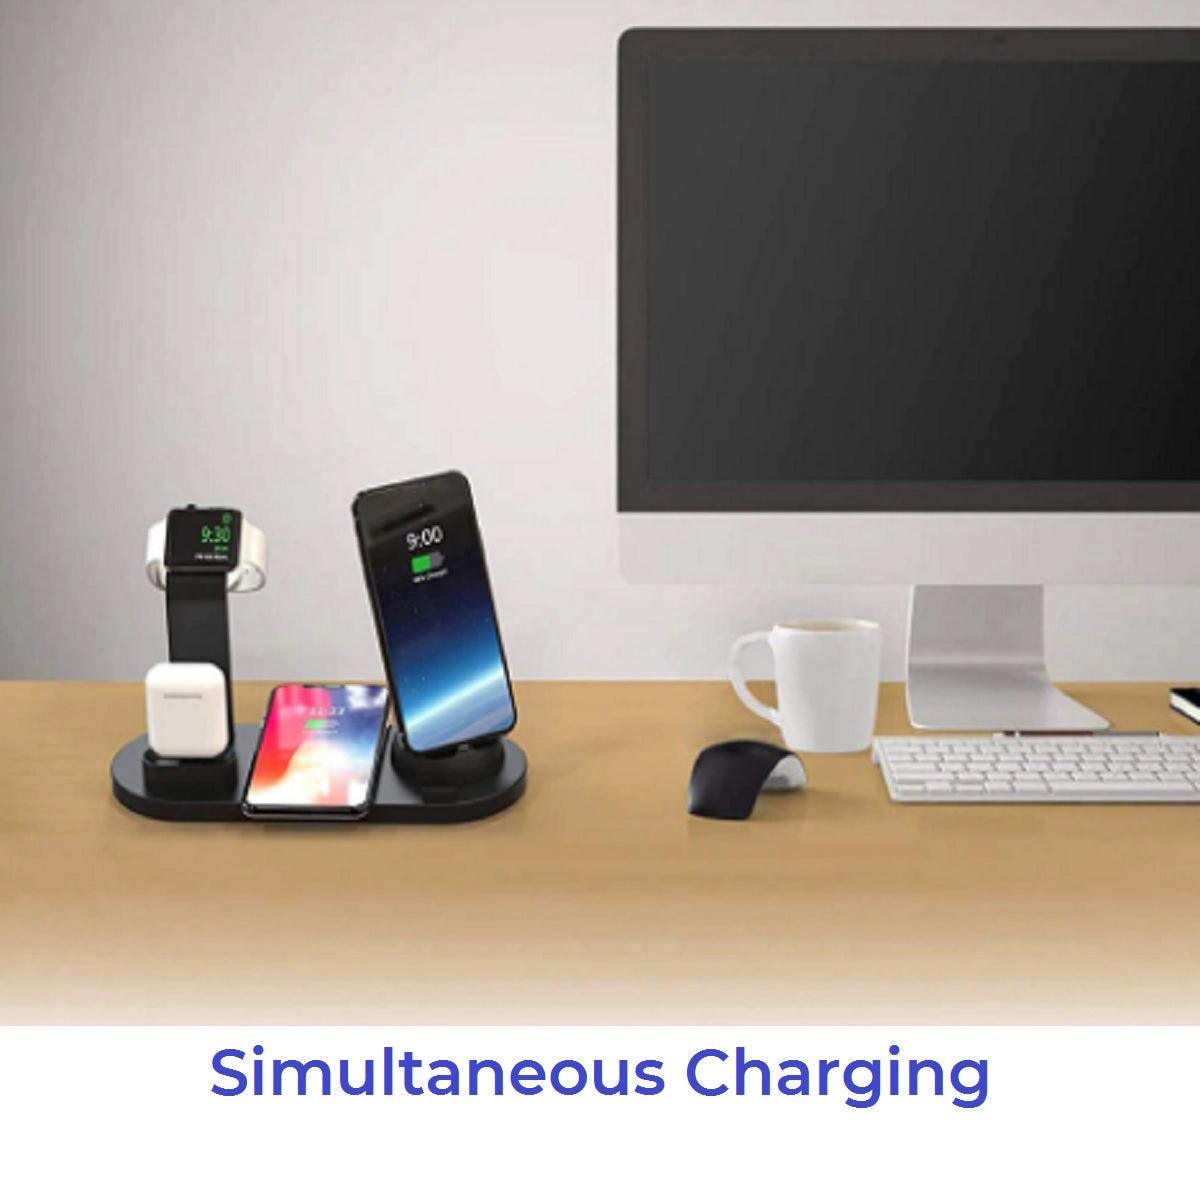 4 in 1 Universal Charging Dock Station - With Wireless Charging - dealskart.com.au